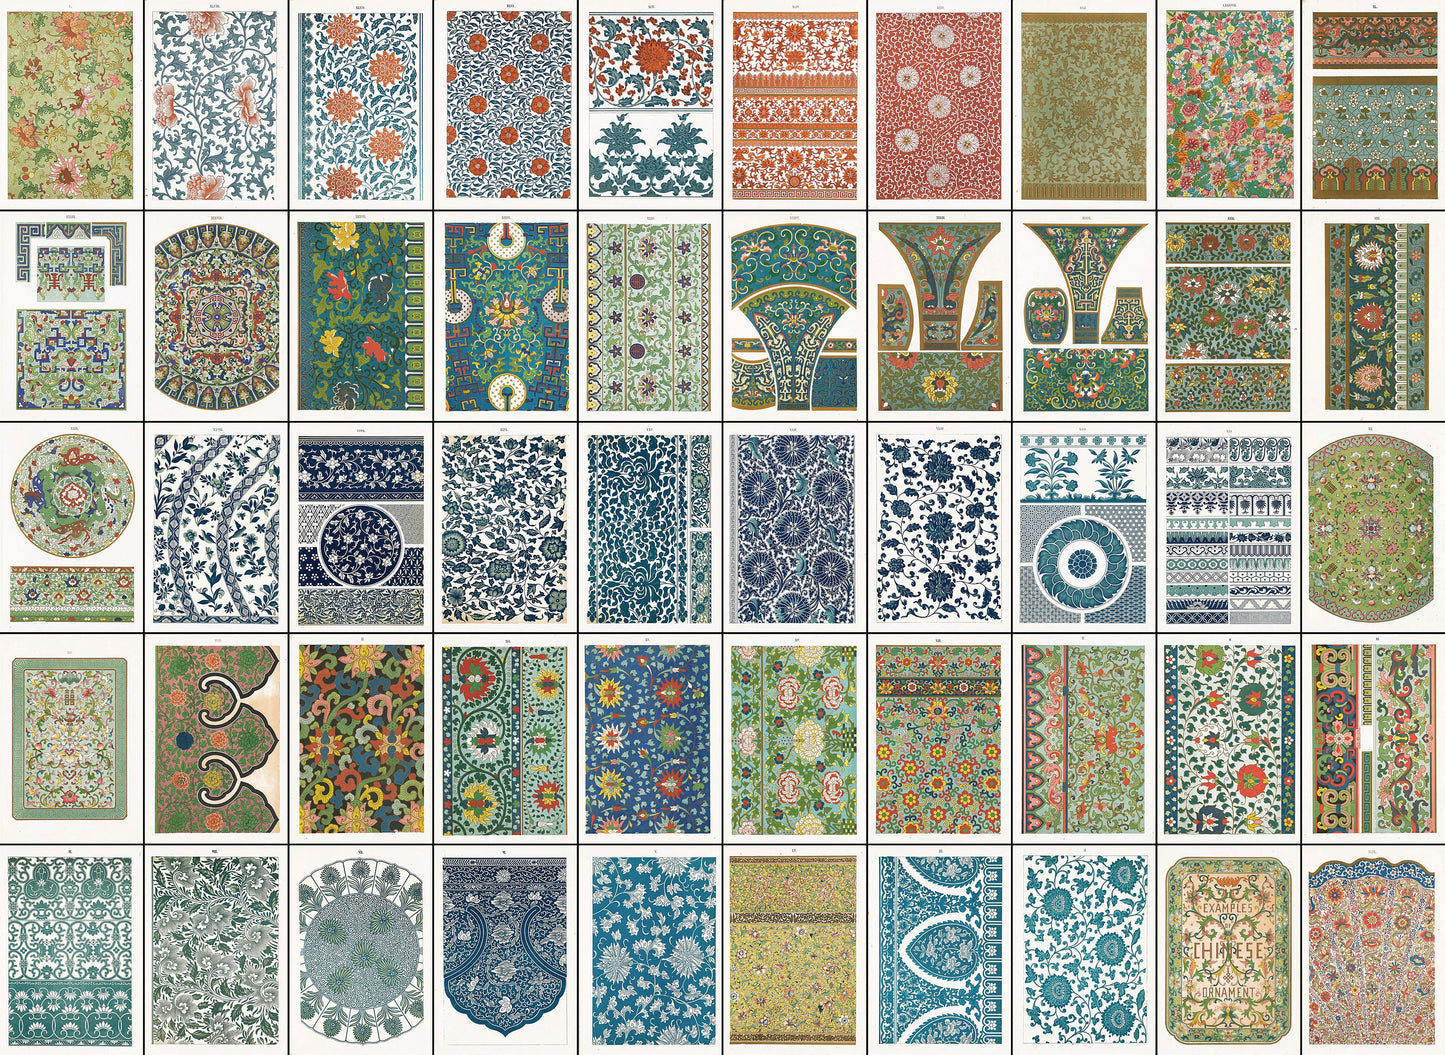 Examples of Chinese Ornament Set 1 [50 Images]